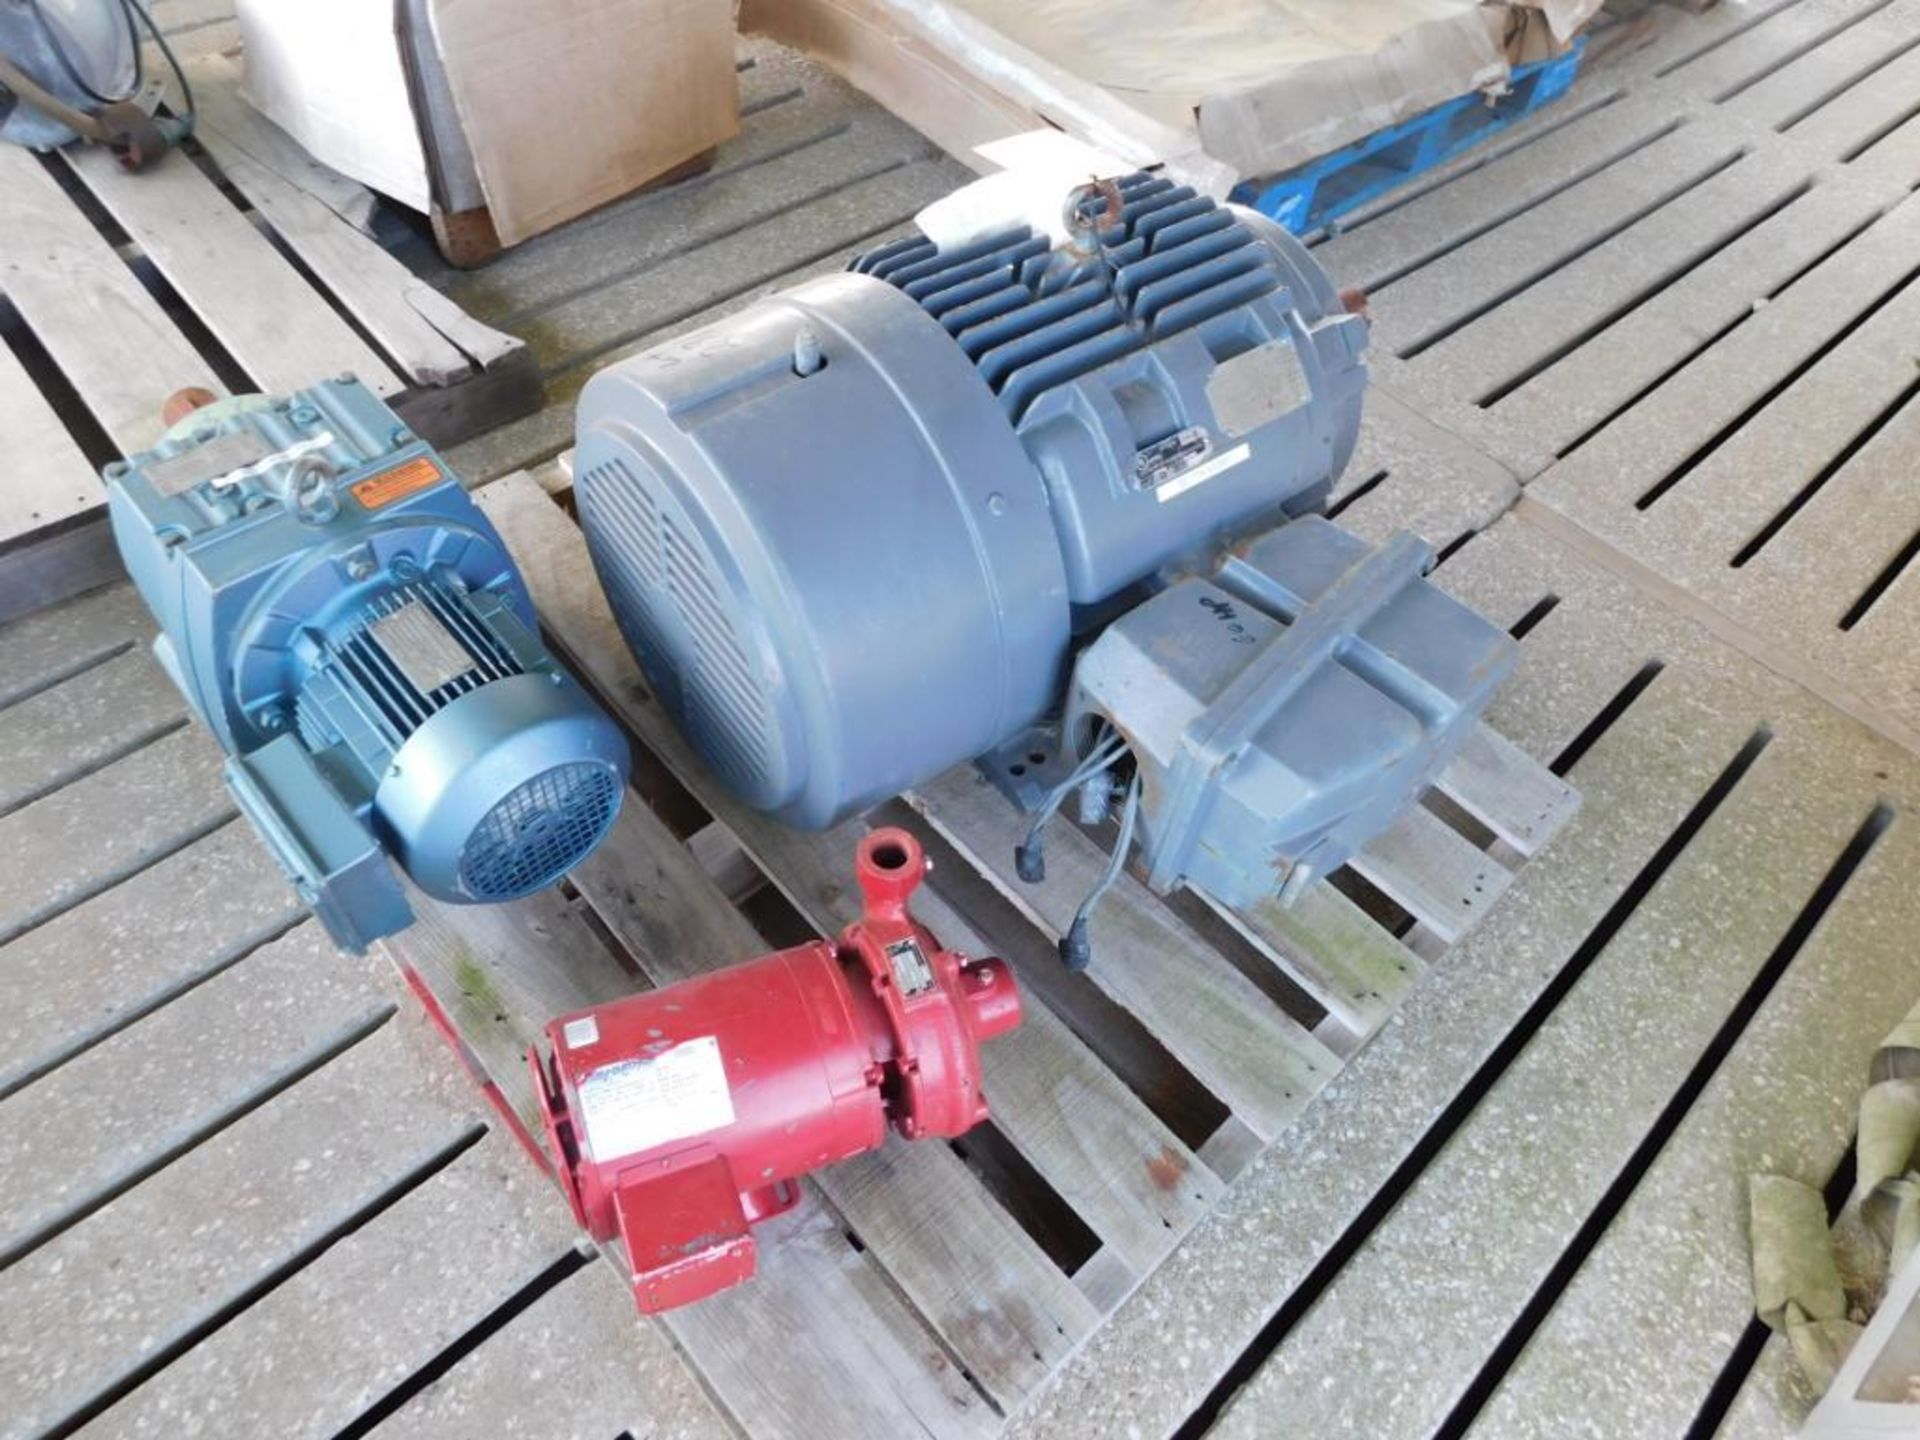 LOT: 60 HP Electric Motor & Gear Reduction Unit (located in Barn C)